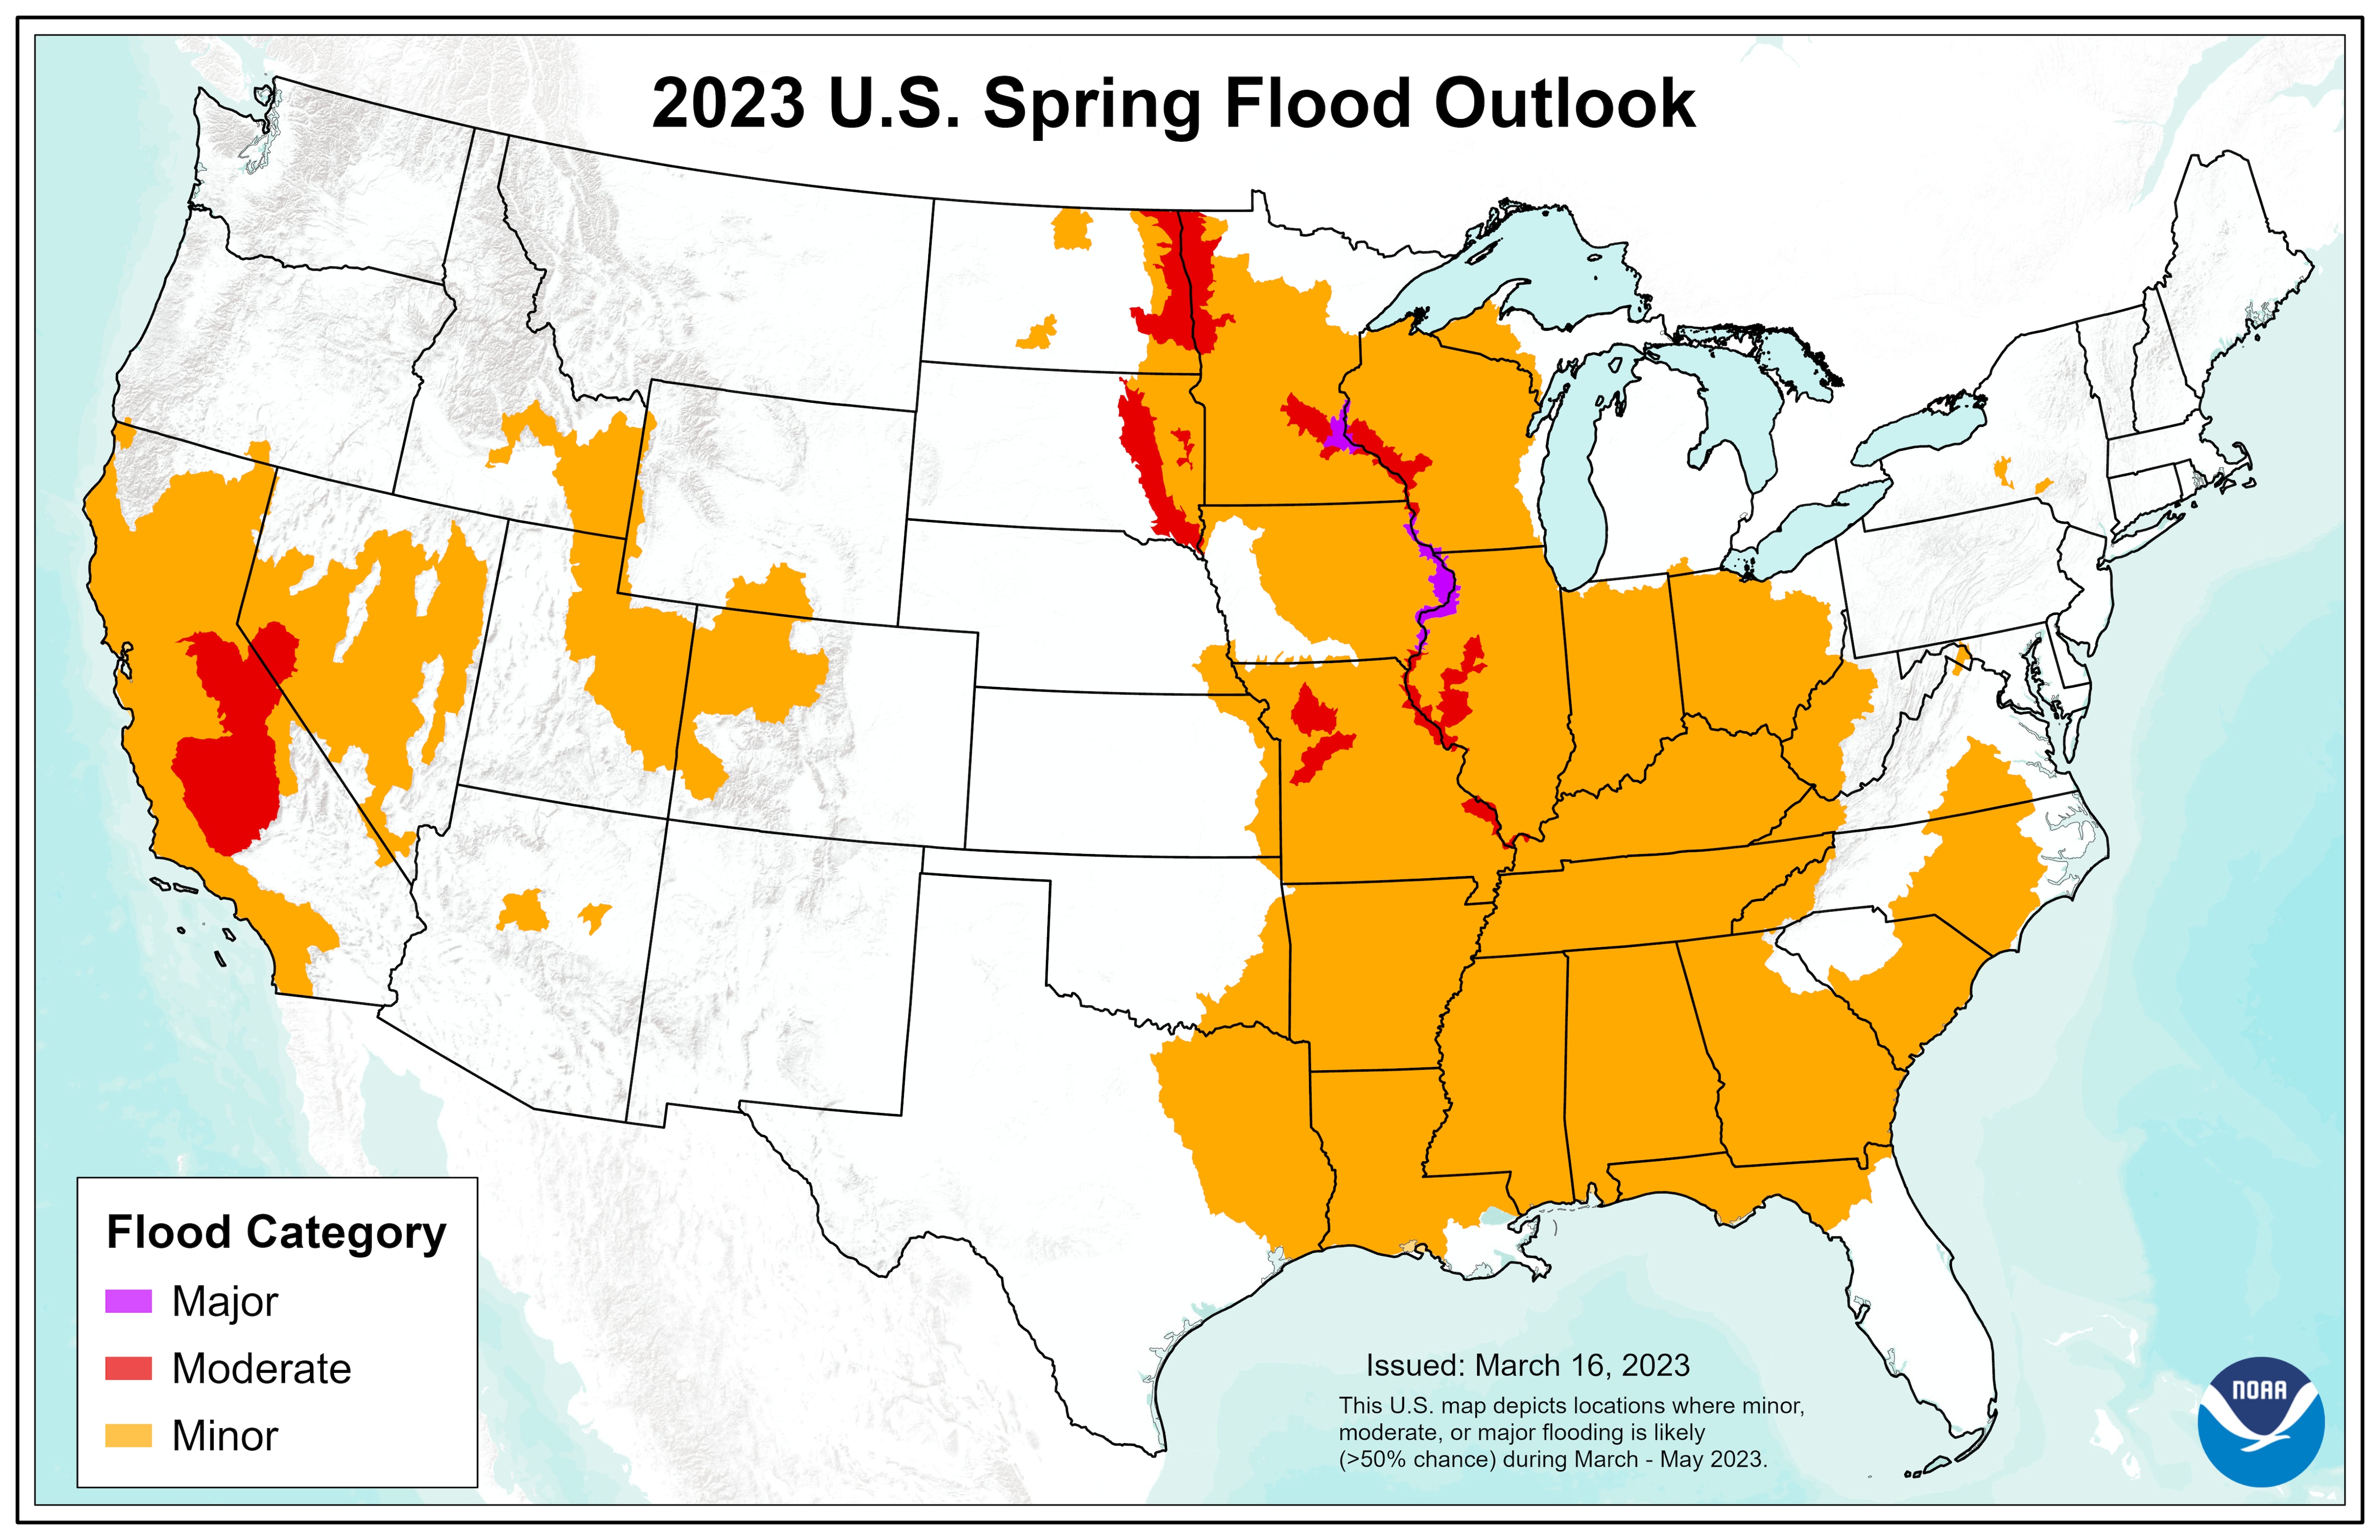 National Spring Flood Risk defined by risk of exceeding Minor, Moderate, and Major Flood Levels.